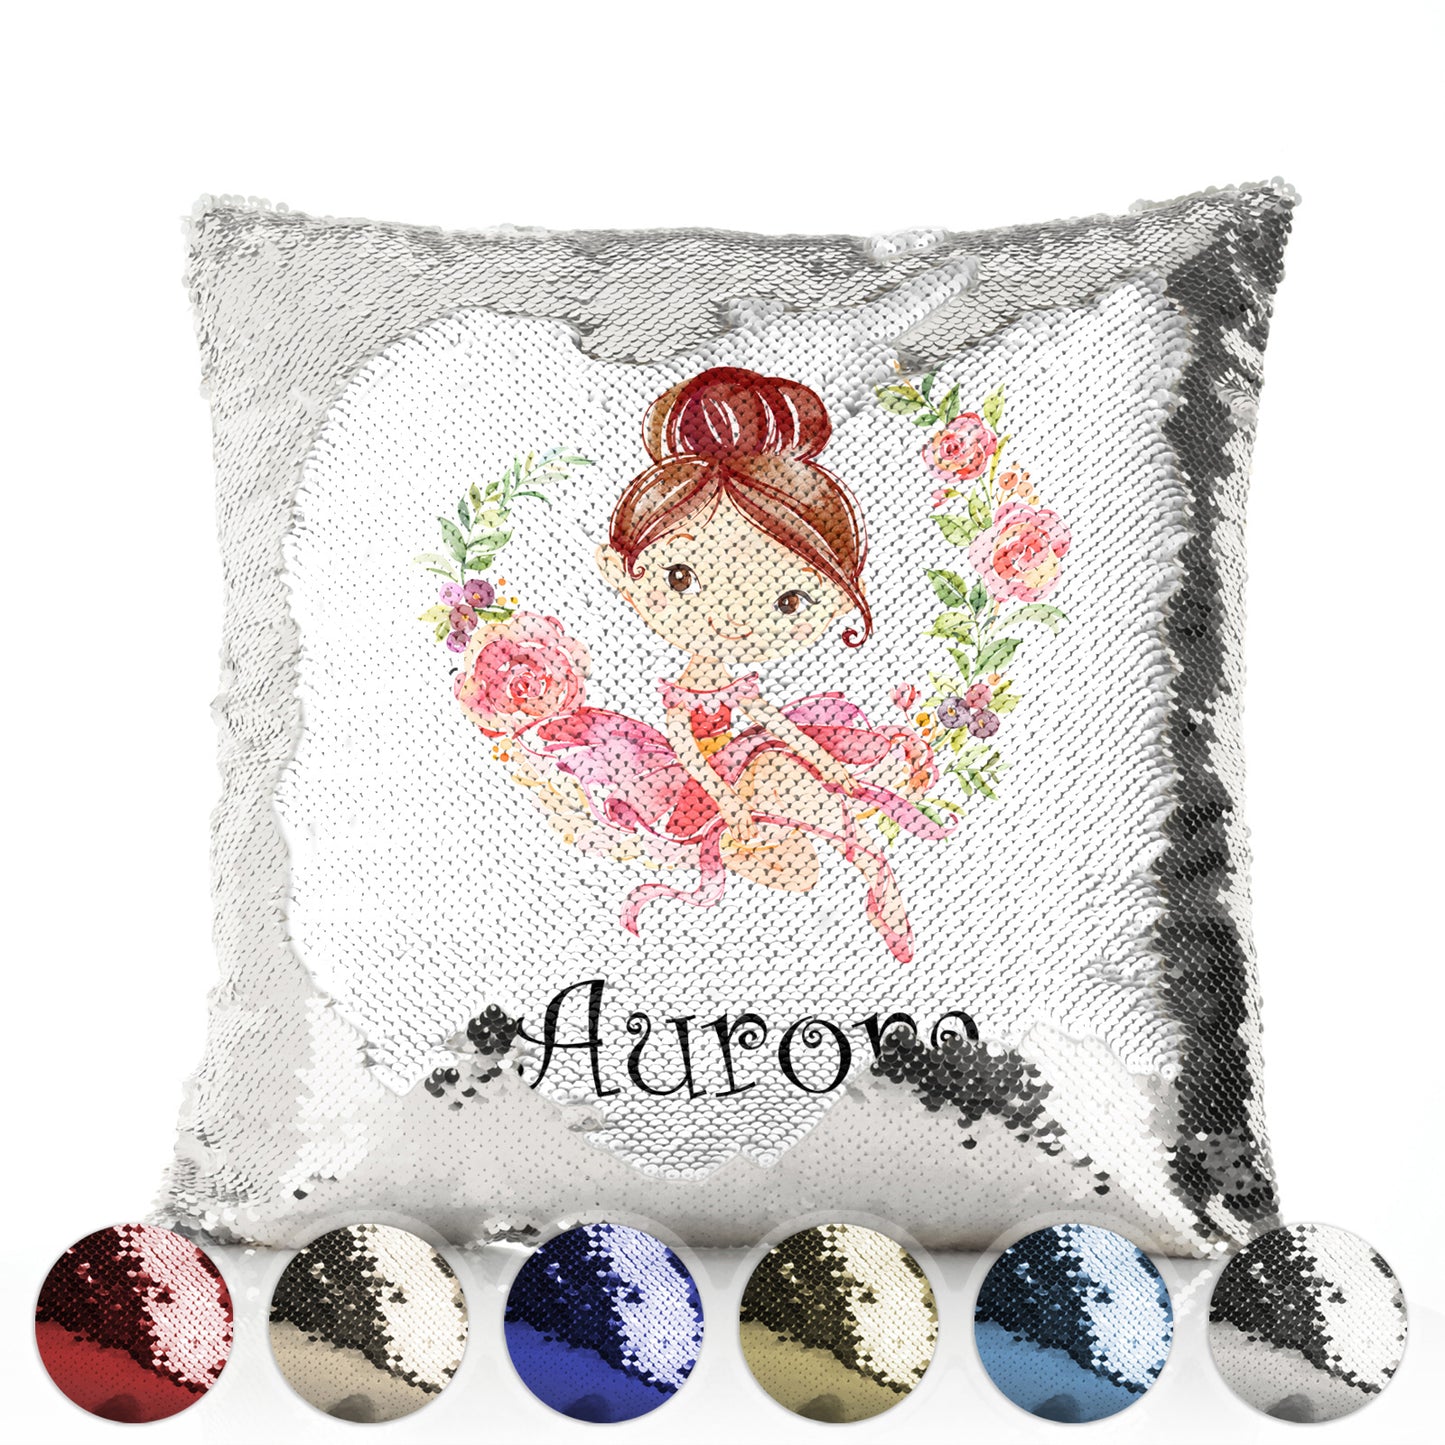 Personalised Sequin Cushion with Cute Text and Flower Wreath Light Brown Hair Ballerina